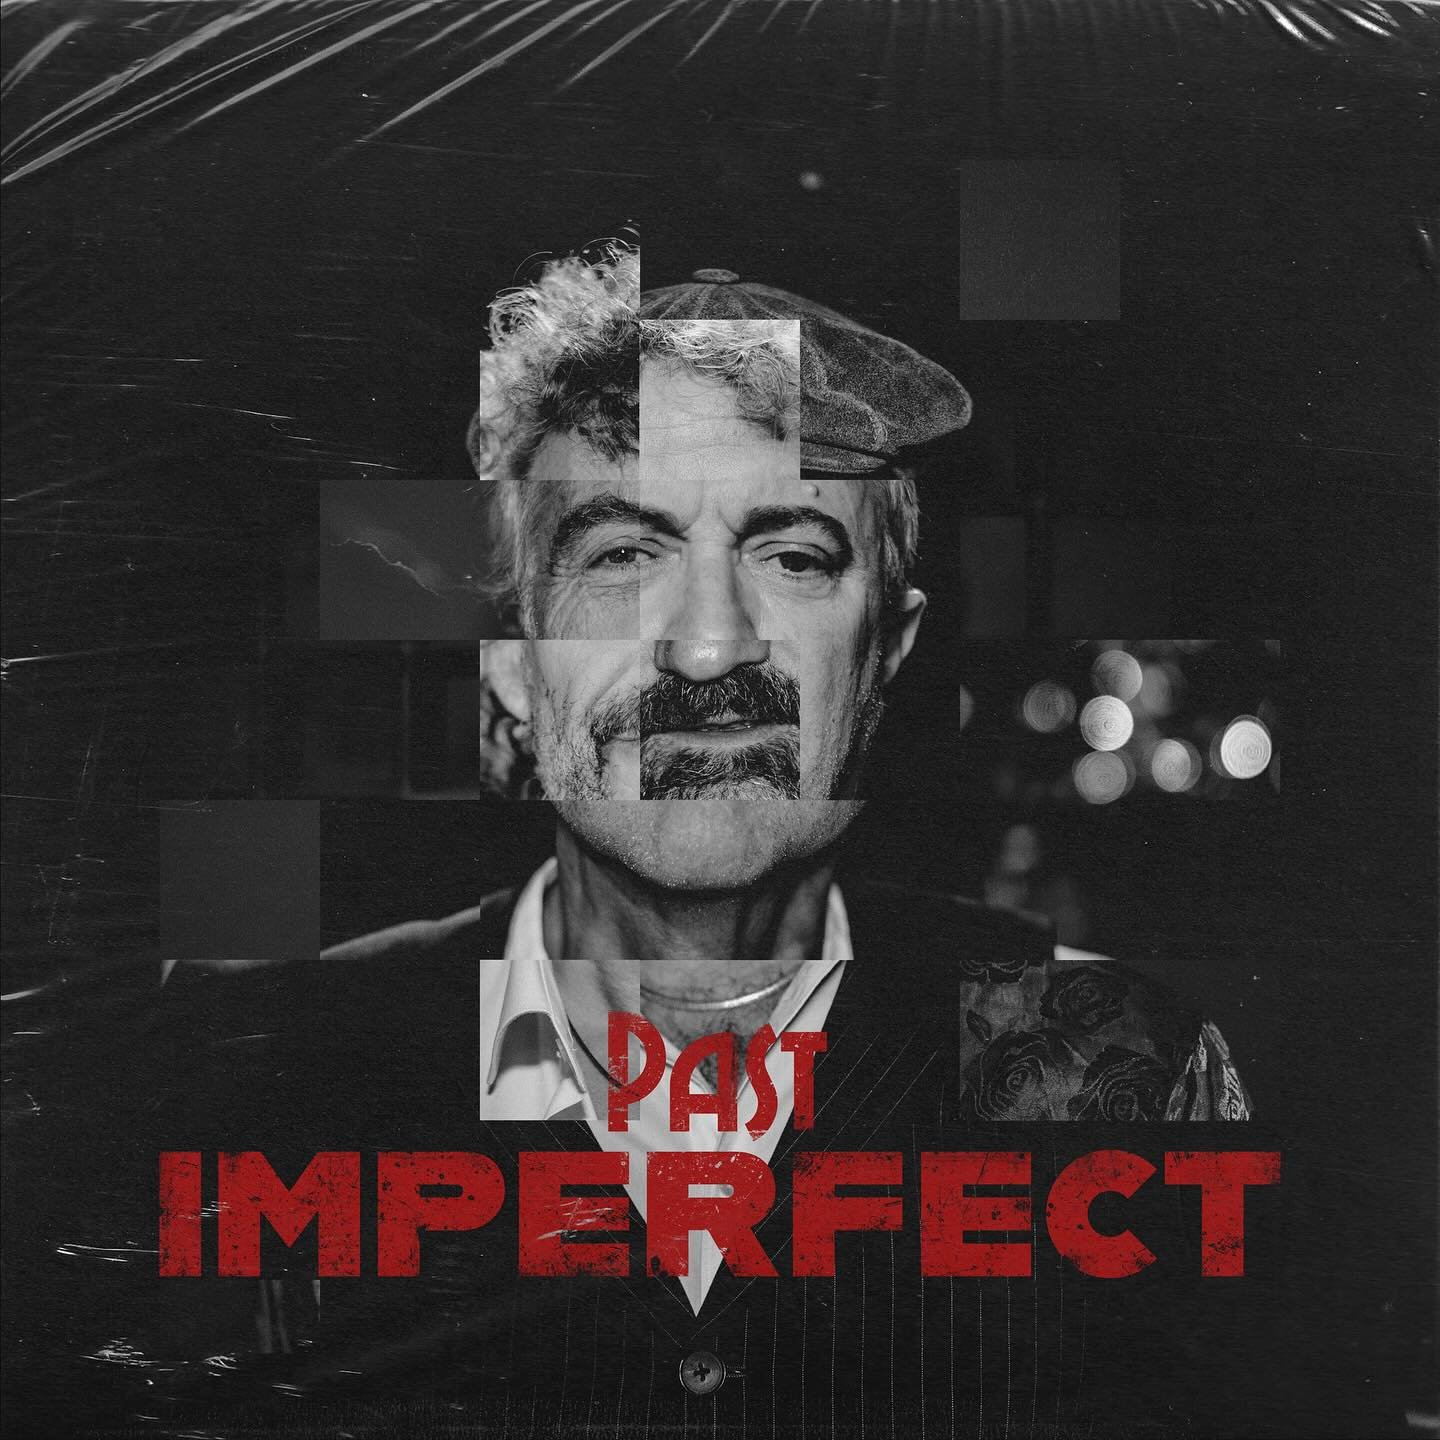 Last year I  popped to #Paris to shoot some #coverArt for 
Anglo-French  band &ldquo;Past Imperfect&rdquo; 
 I had a great time hanging out and making #Art with some very lovely talented people ☕️🍻🍷☕️🎸🎤☺️

@past_imperfect_band